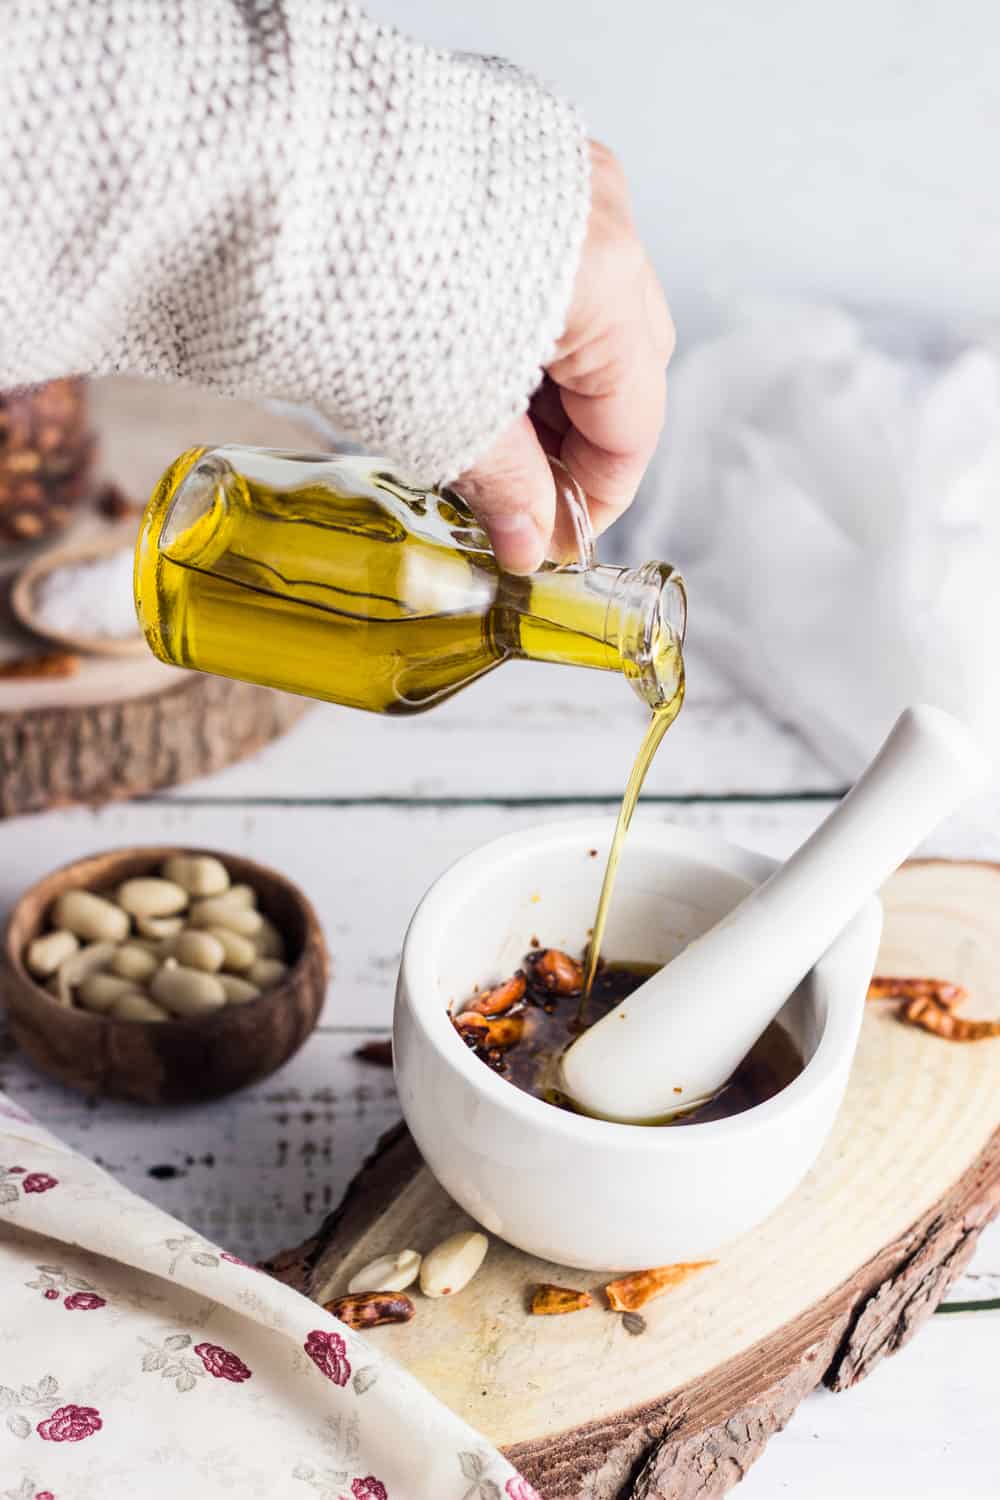 4 Tips to Tell if Peanut Oil has Gone Bad